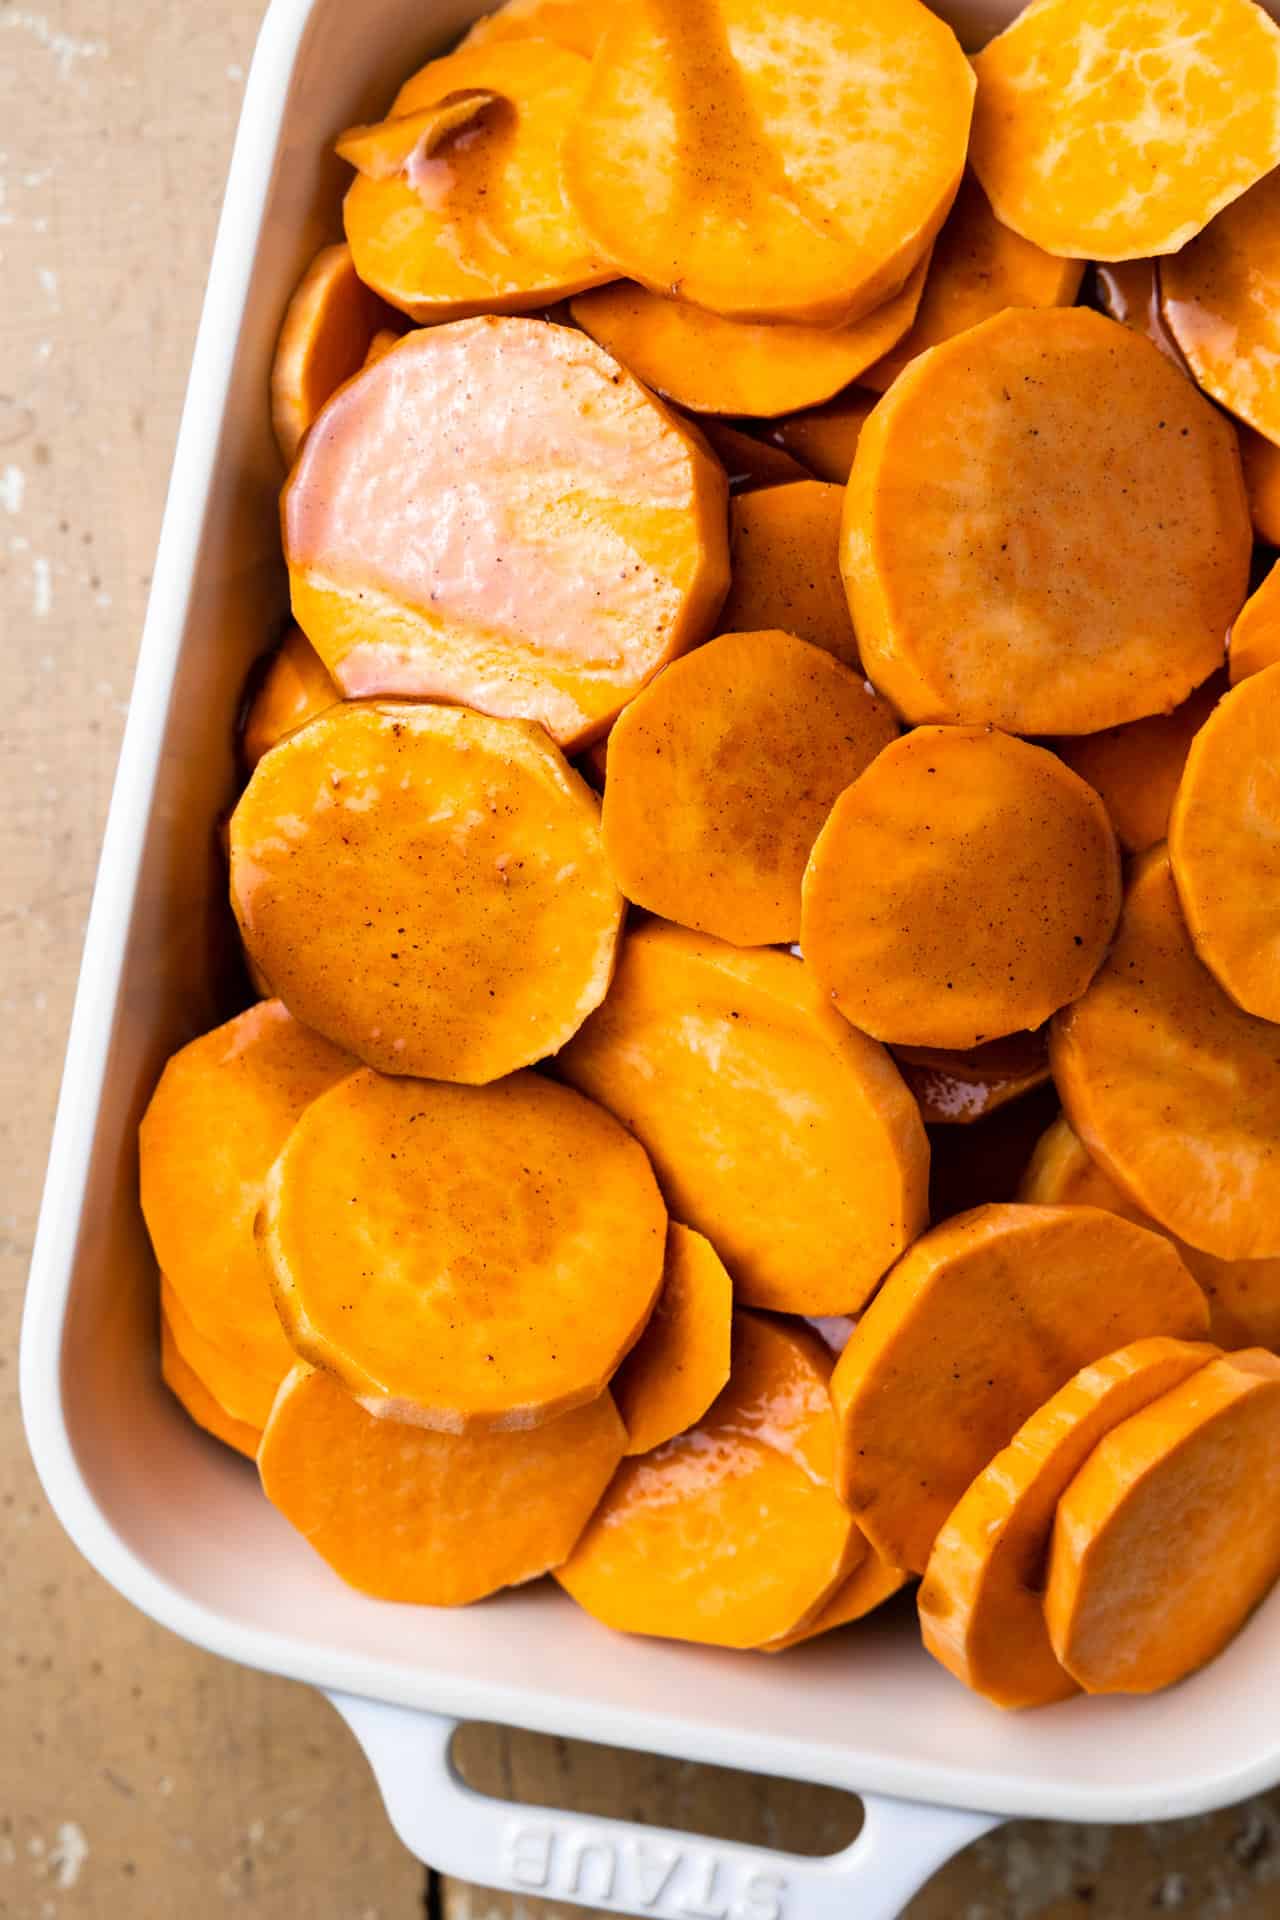 Brown sugar sauce poured over sliced sweet potato in a baking dish.